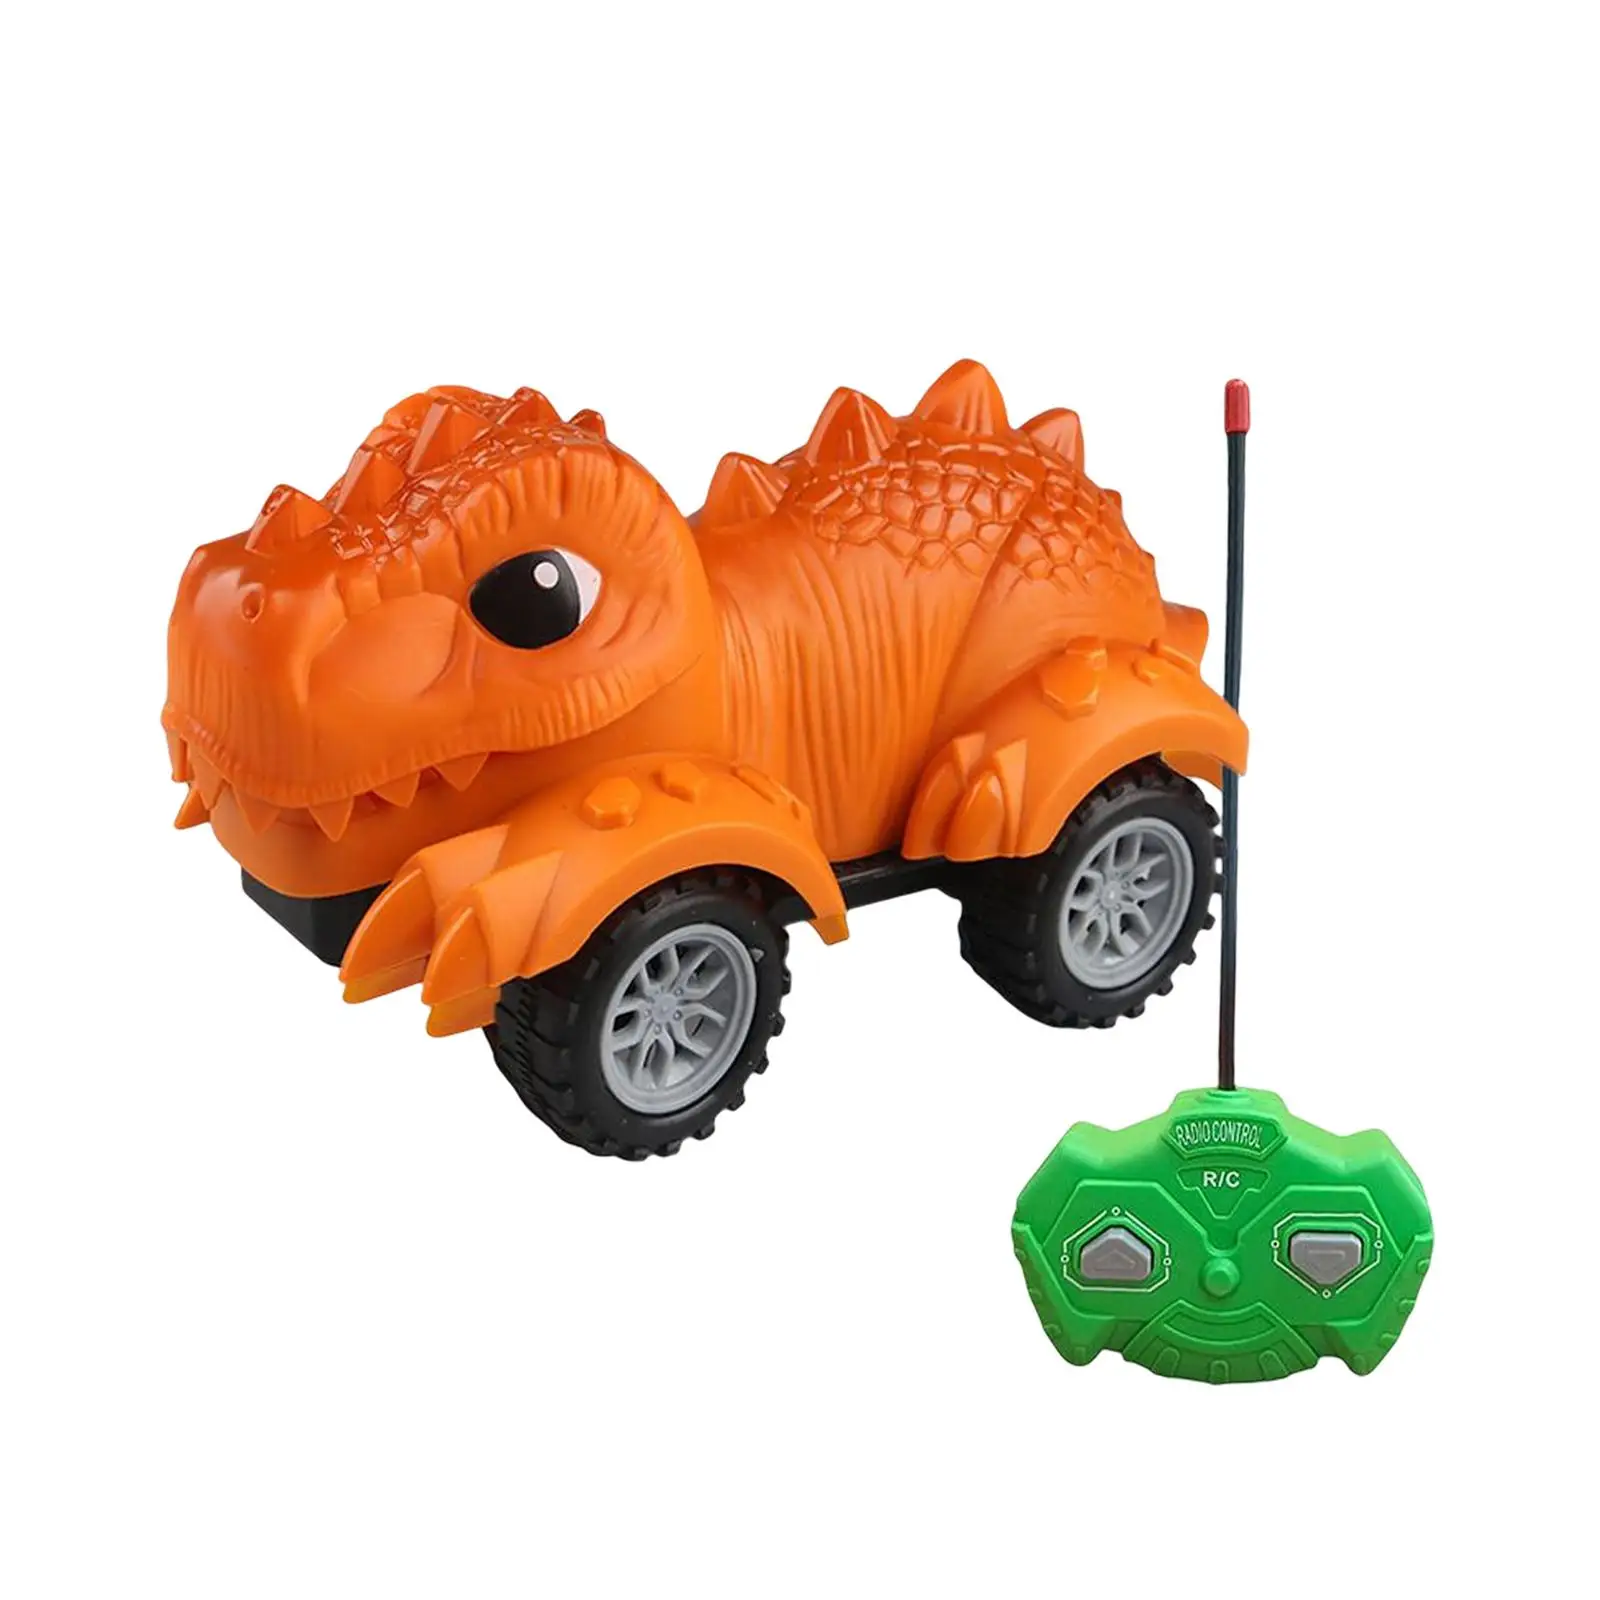 Remote Control Dinosaur Toy Car Learning Educational toys Toy Vehicle for Party Favors Kids